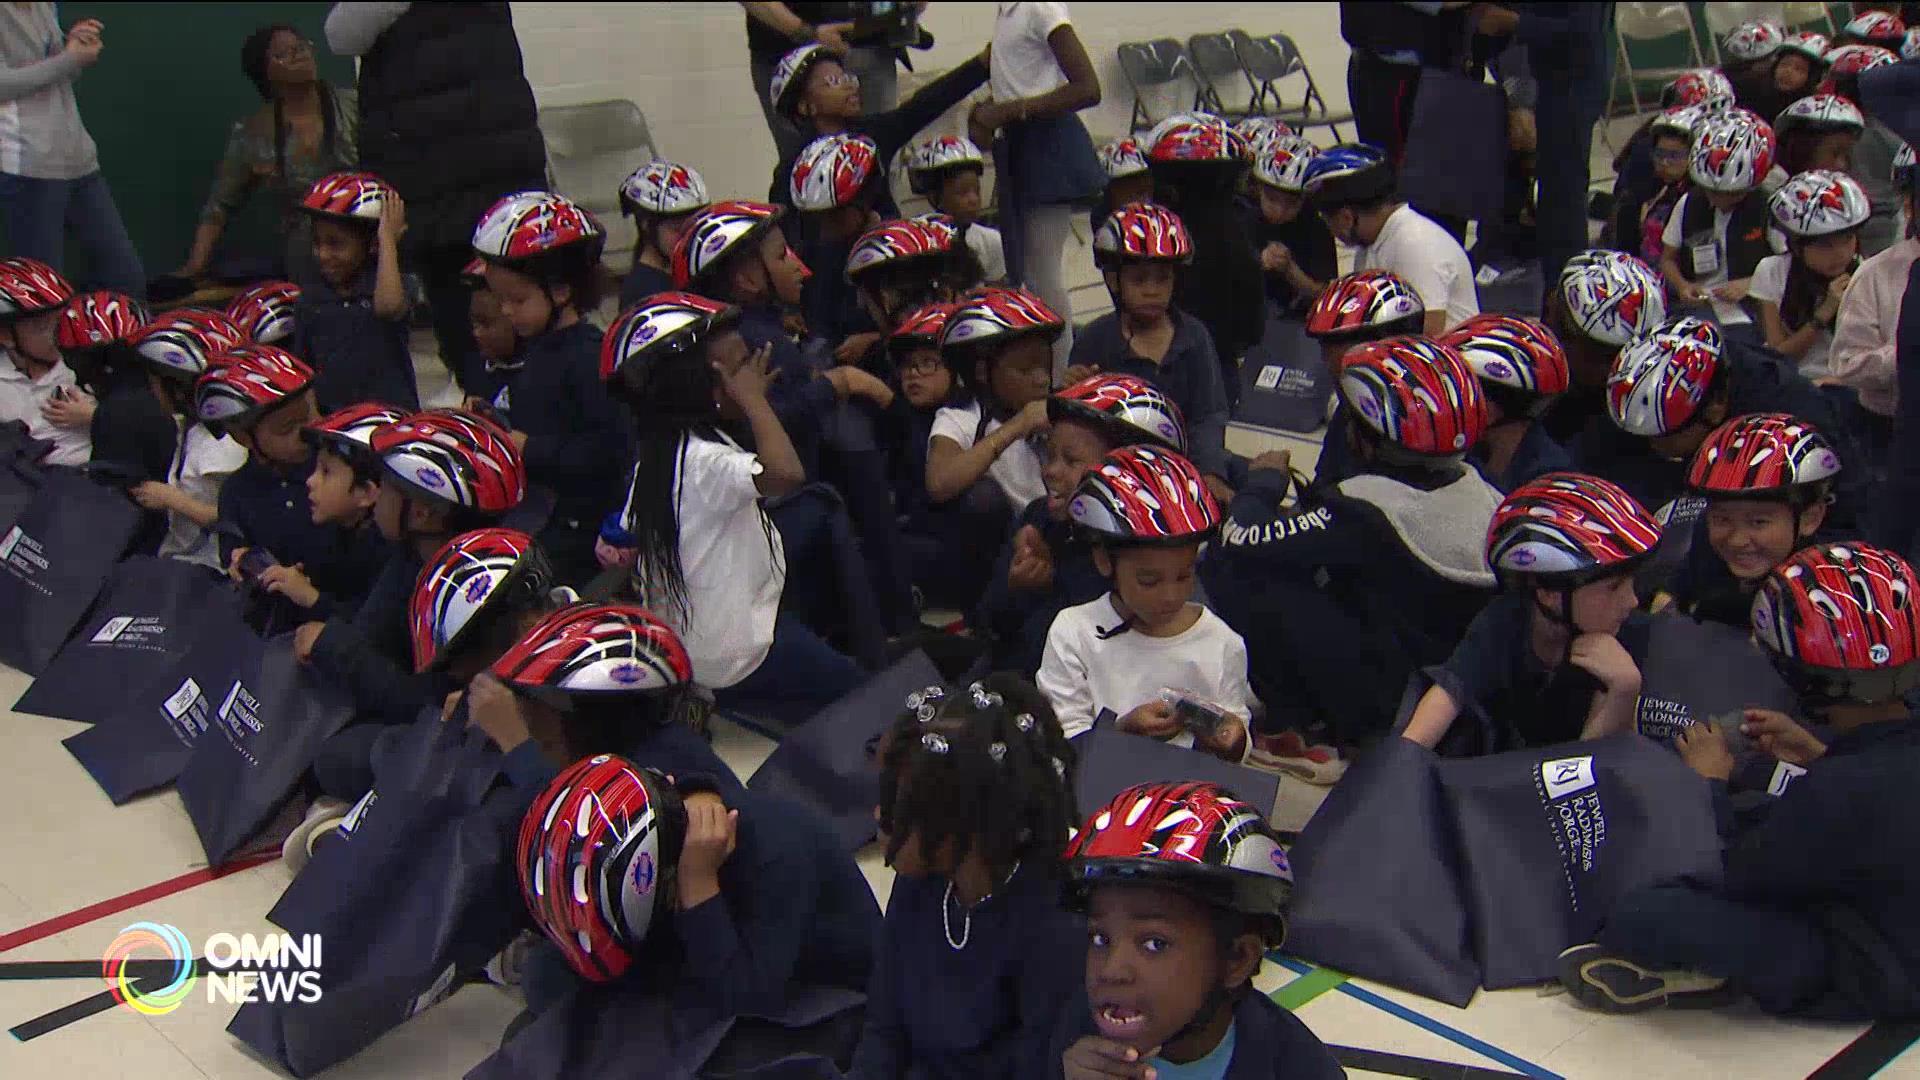 Toronto Police and TCDSB deliver 345 bicycle helmets to kids